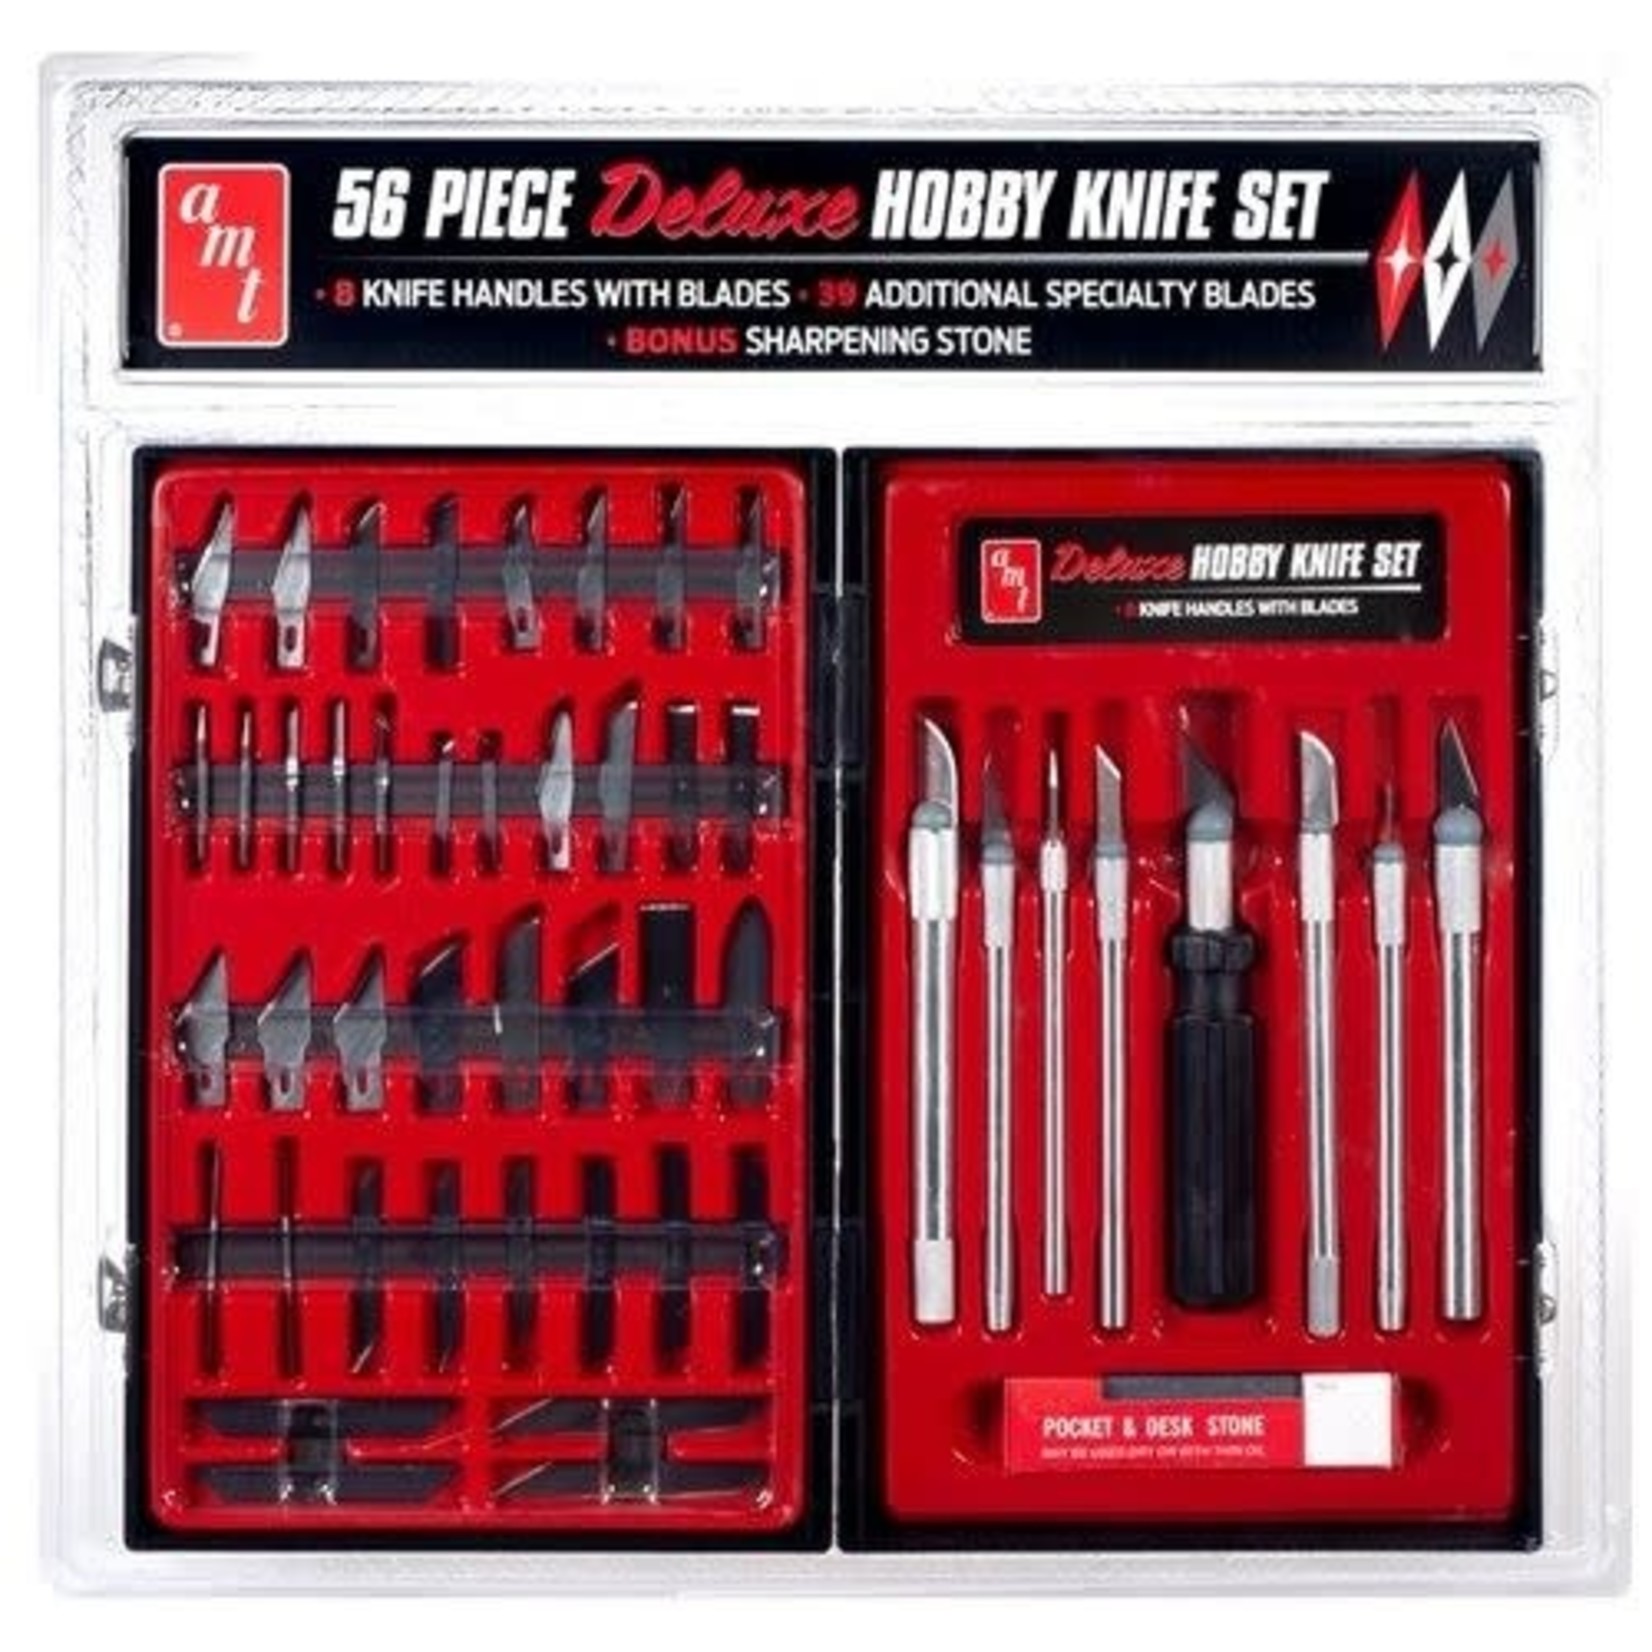 AMT 56pc Deluxe Hobby Knife Set